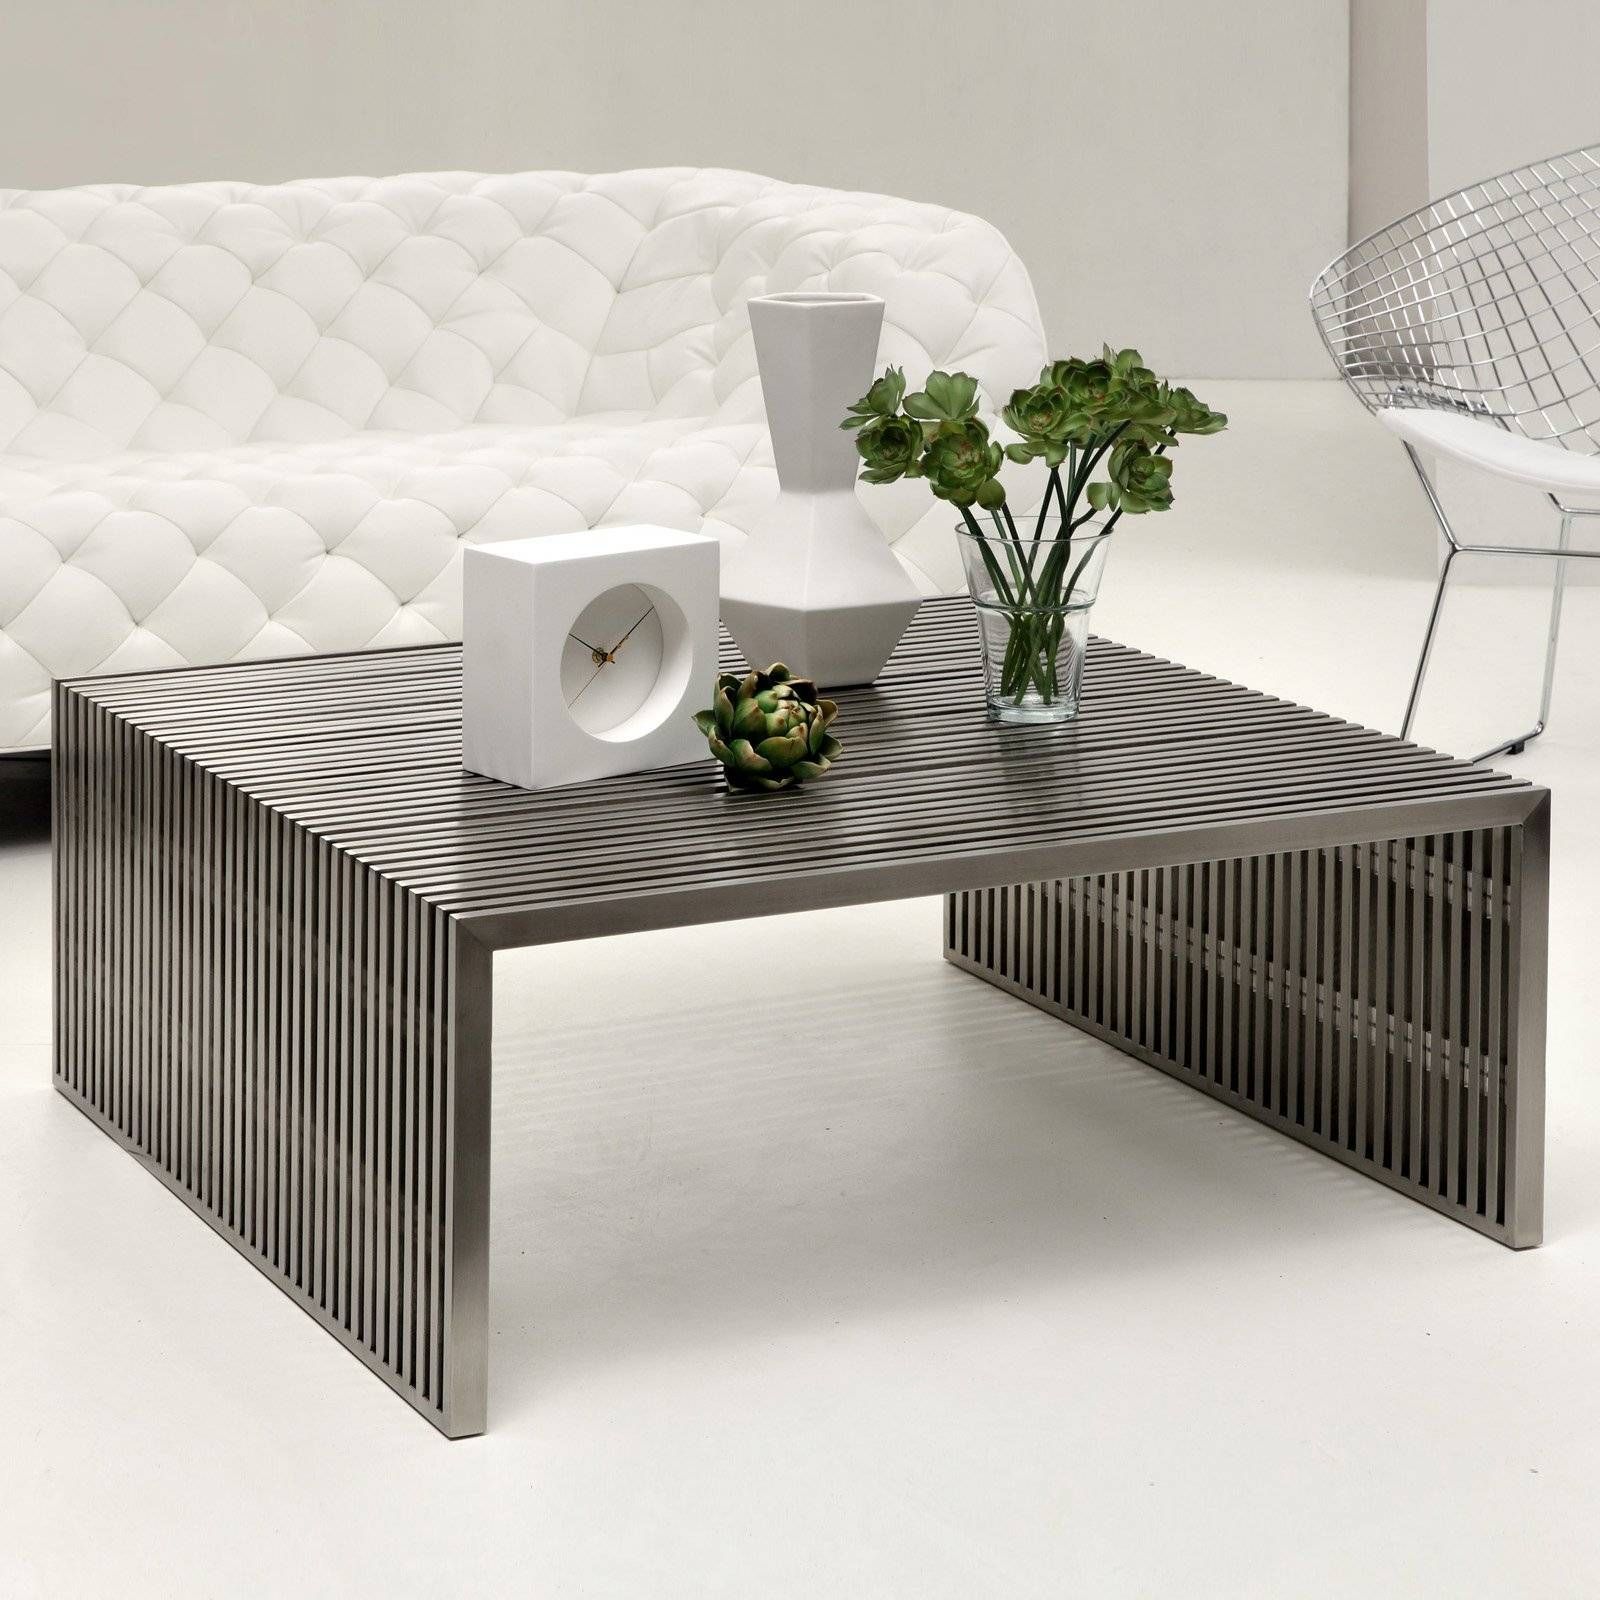 Zuo Modern Square Coffee Table – Coffee Tables At Hayneedle For Metal Square Coffee Tables (View 17 of 30)